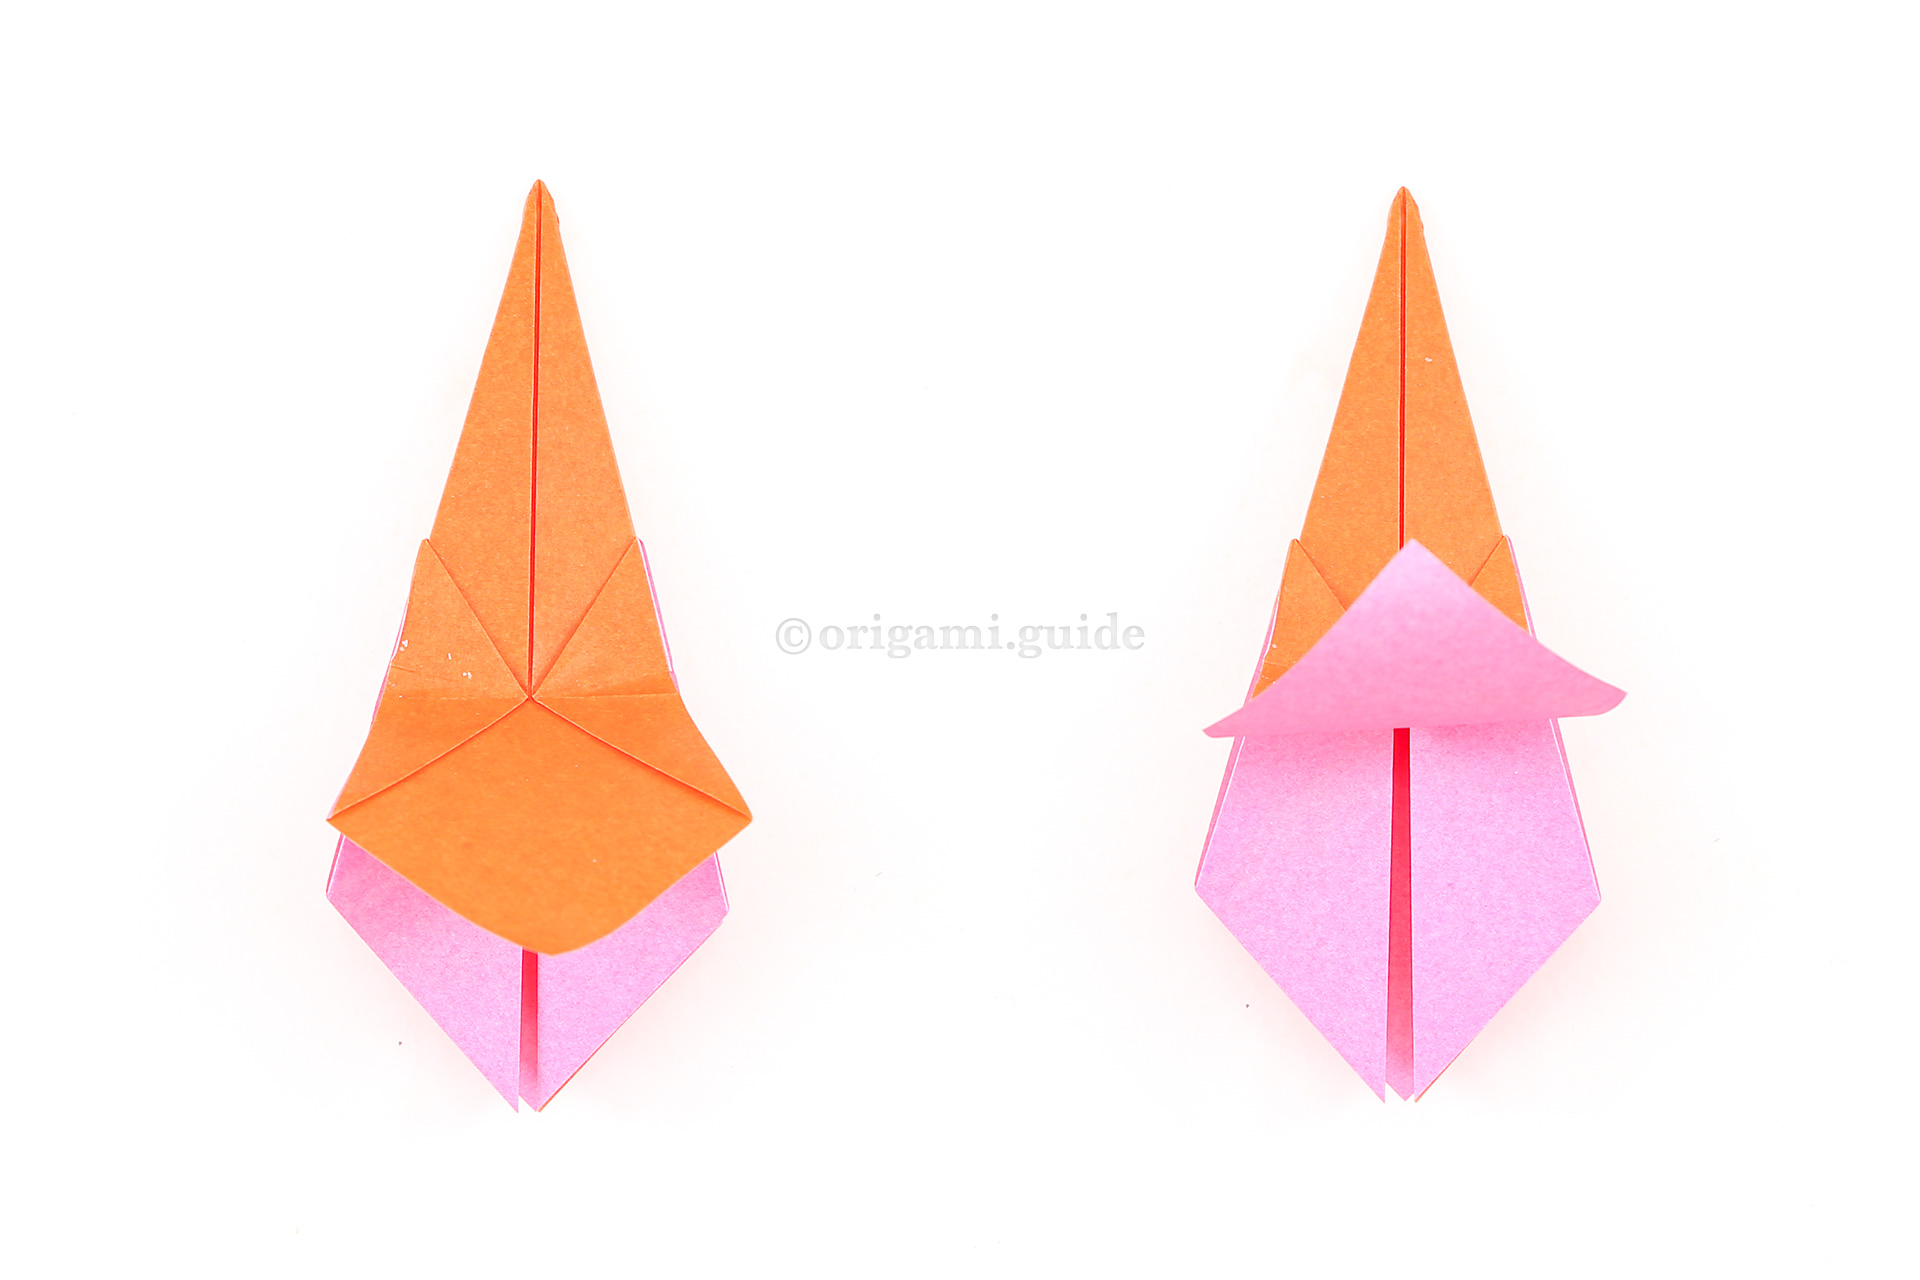 You can now start to unfold the petals of the origami daylily.